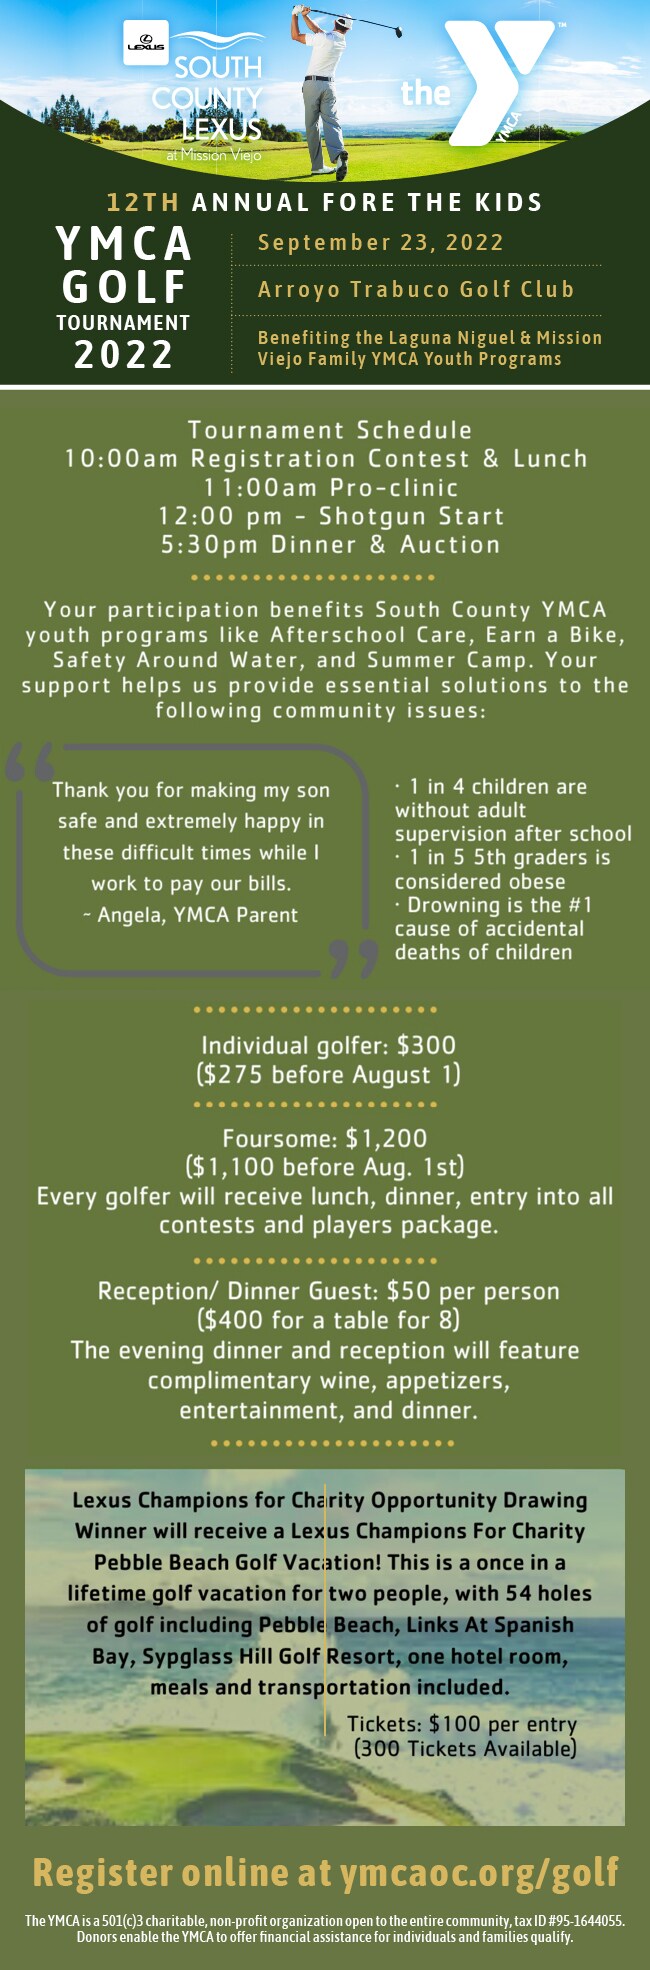 Join us for the 2022 YMCA FORE the Kids Golf Tournament!      WHEN:    Friday, September 23, 2022WHERE:    Arroyo Trabuco Golf Club 26772 Avery Parkway Mission Viejo, CAINDIVIDUAL GOLFER FEE:    $275 (before August 1st)FOURSOME FEE:     $1,100 (before August 1st)RECEPTION/EARLY DINNER GUEST FEE:     $50 per person/$400 tableEvery golfer will receive lunch, dinner, entry into all contests and a players gift package.Your participation supports youth and families in our local communities by allowing them to participate in needed programs like afterschool care, Earn A Bike, Safety Around Water and summer camps.